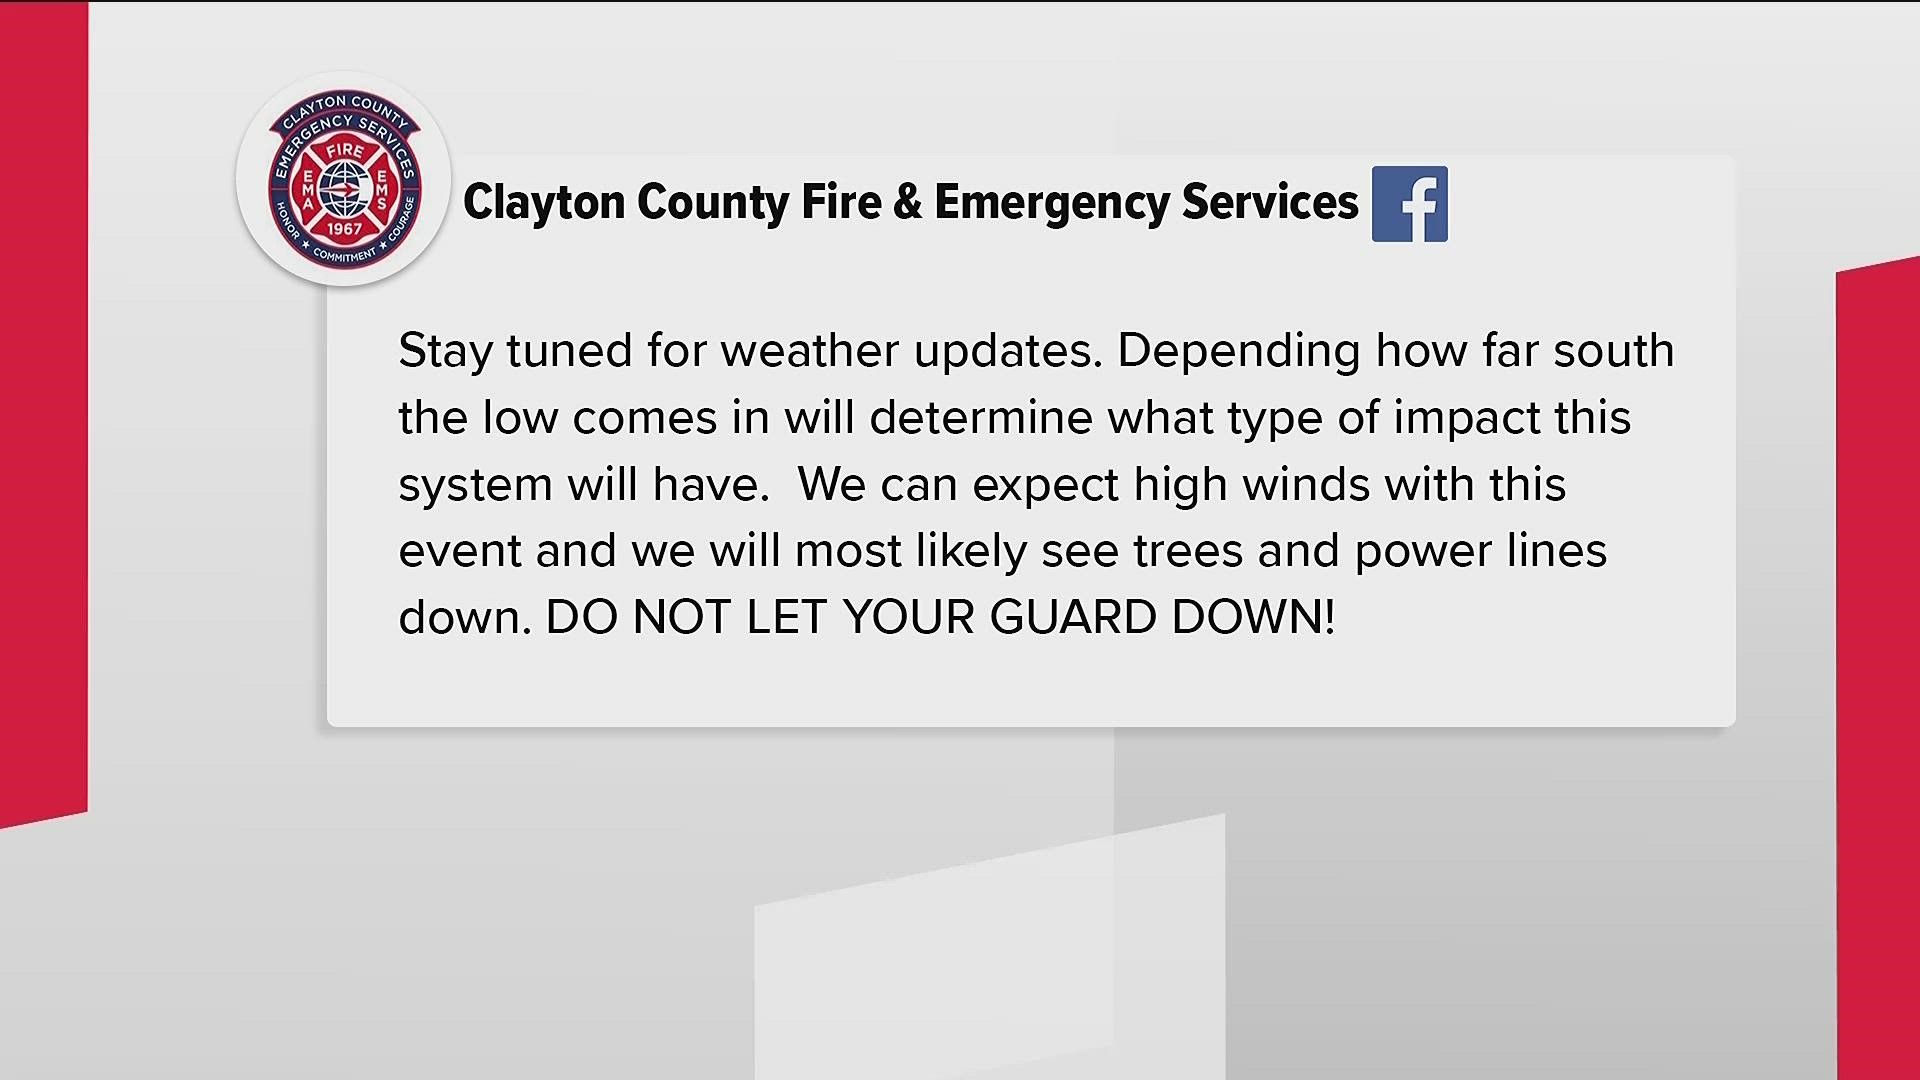 Clayton County Fire and Emergency Services asked residents to not let their guard down.